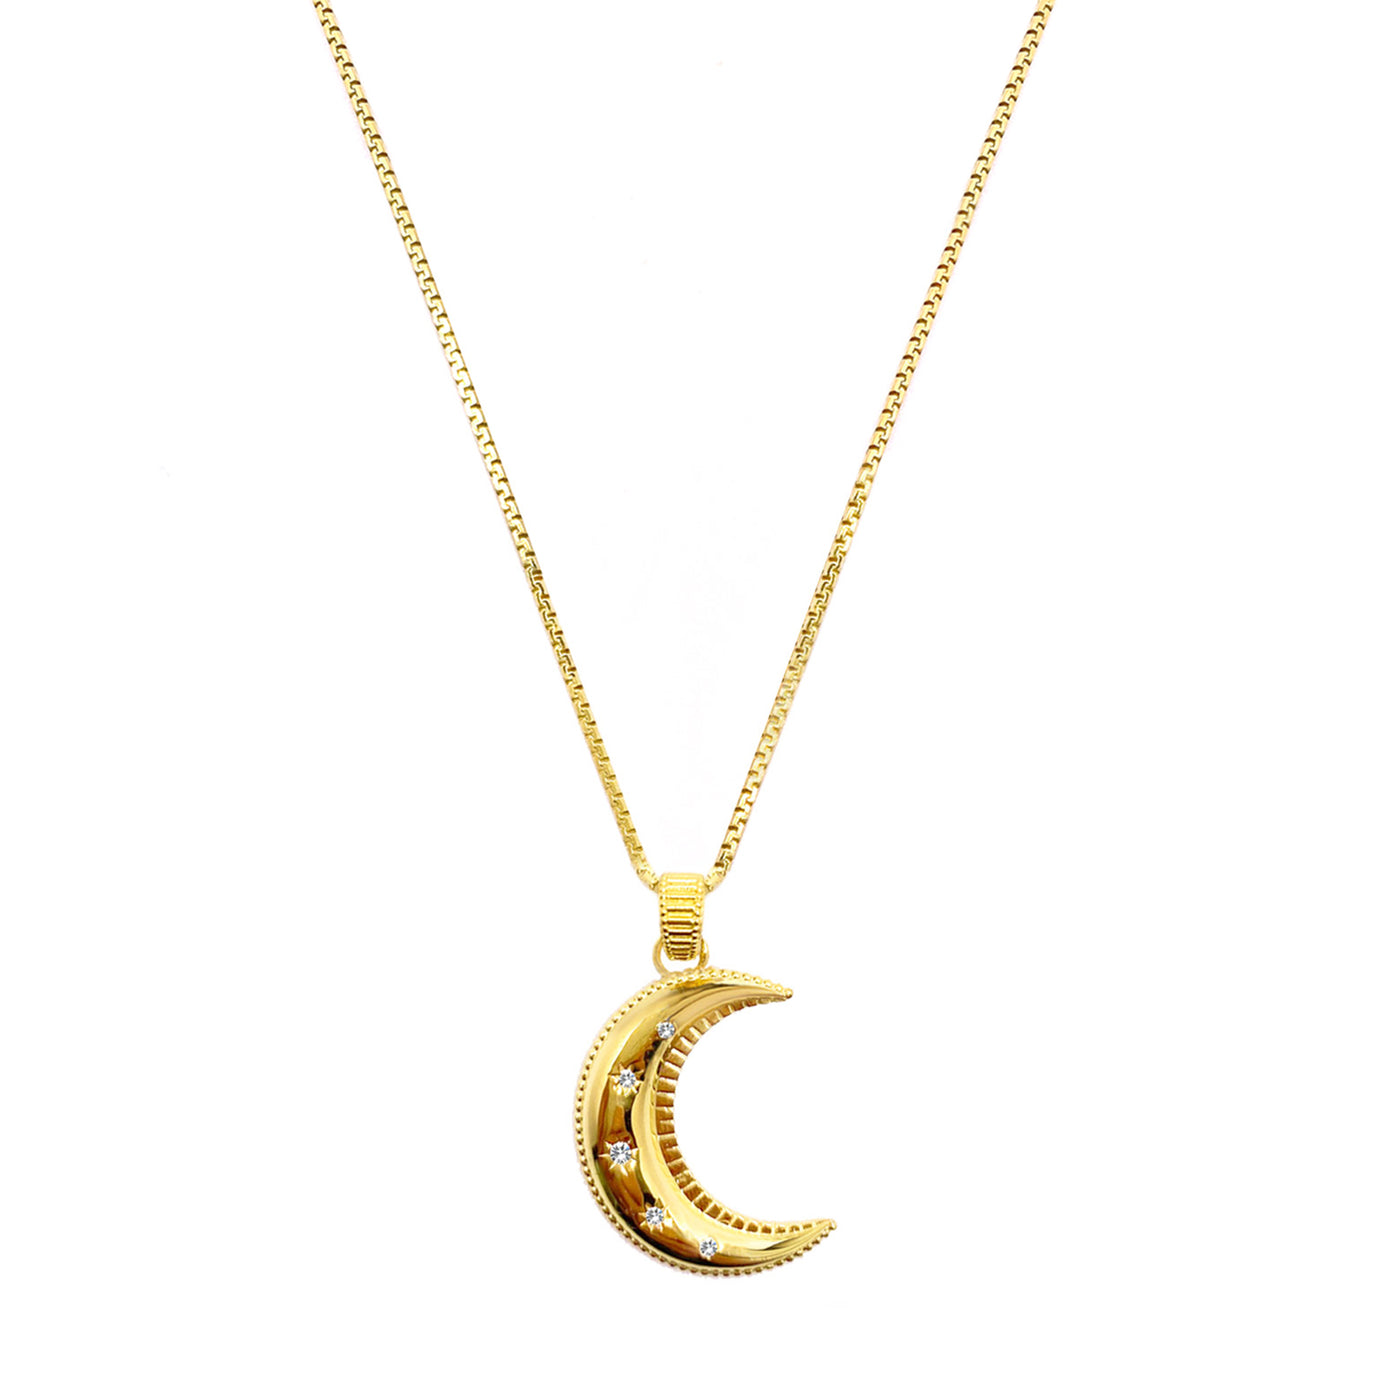 Gold plated sterling silver engraved moon pendant necklace on box chain CZ crystals